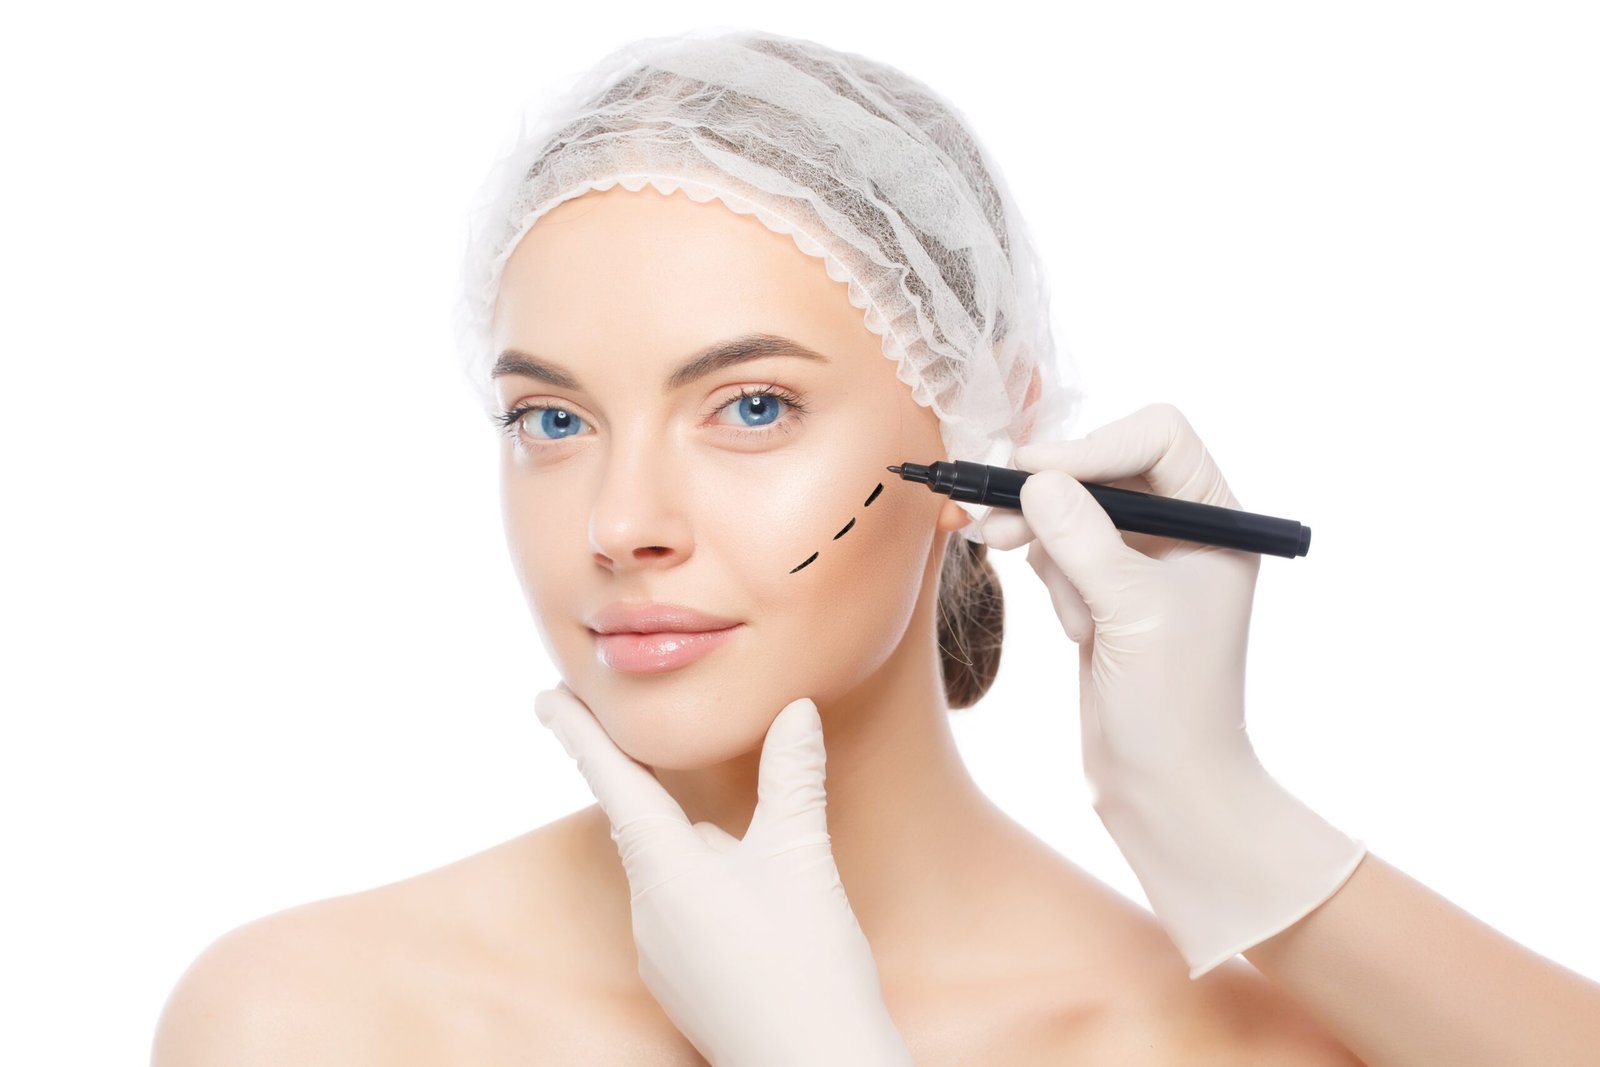 Young beautiful woman prepared for plastic surgery by doctor who uses skin marker, isolated on white background